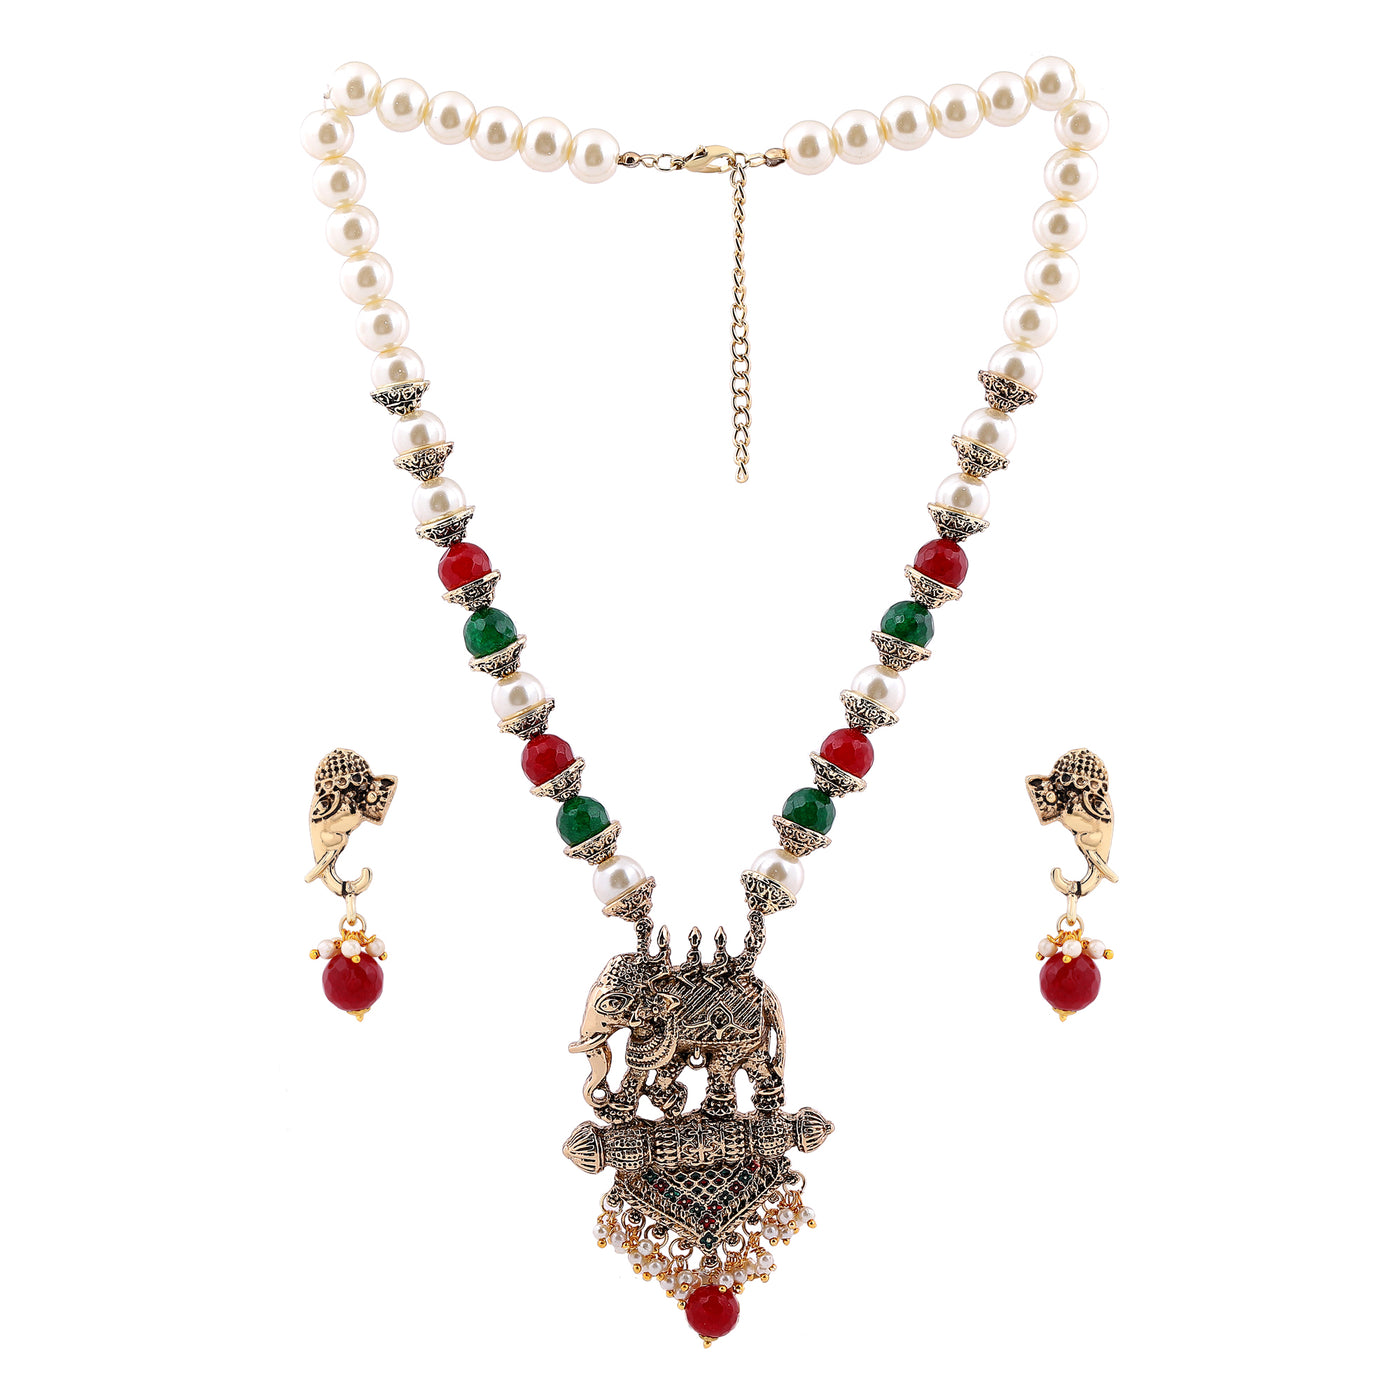 Estele Gold Plated Antique Adorable Elephant Pearl Necklace Set with Beads & Enamel for Women